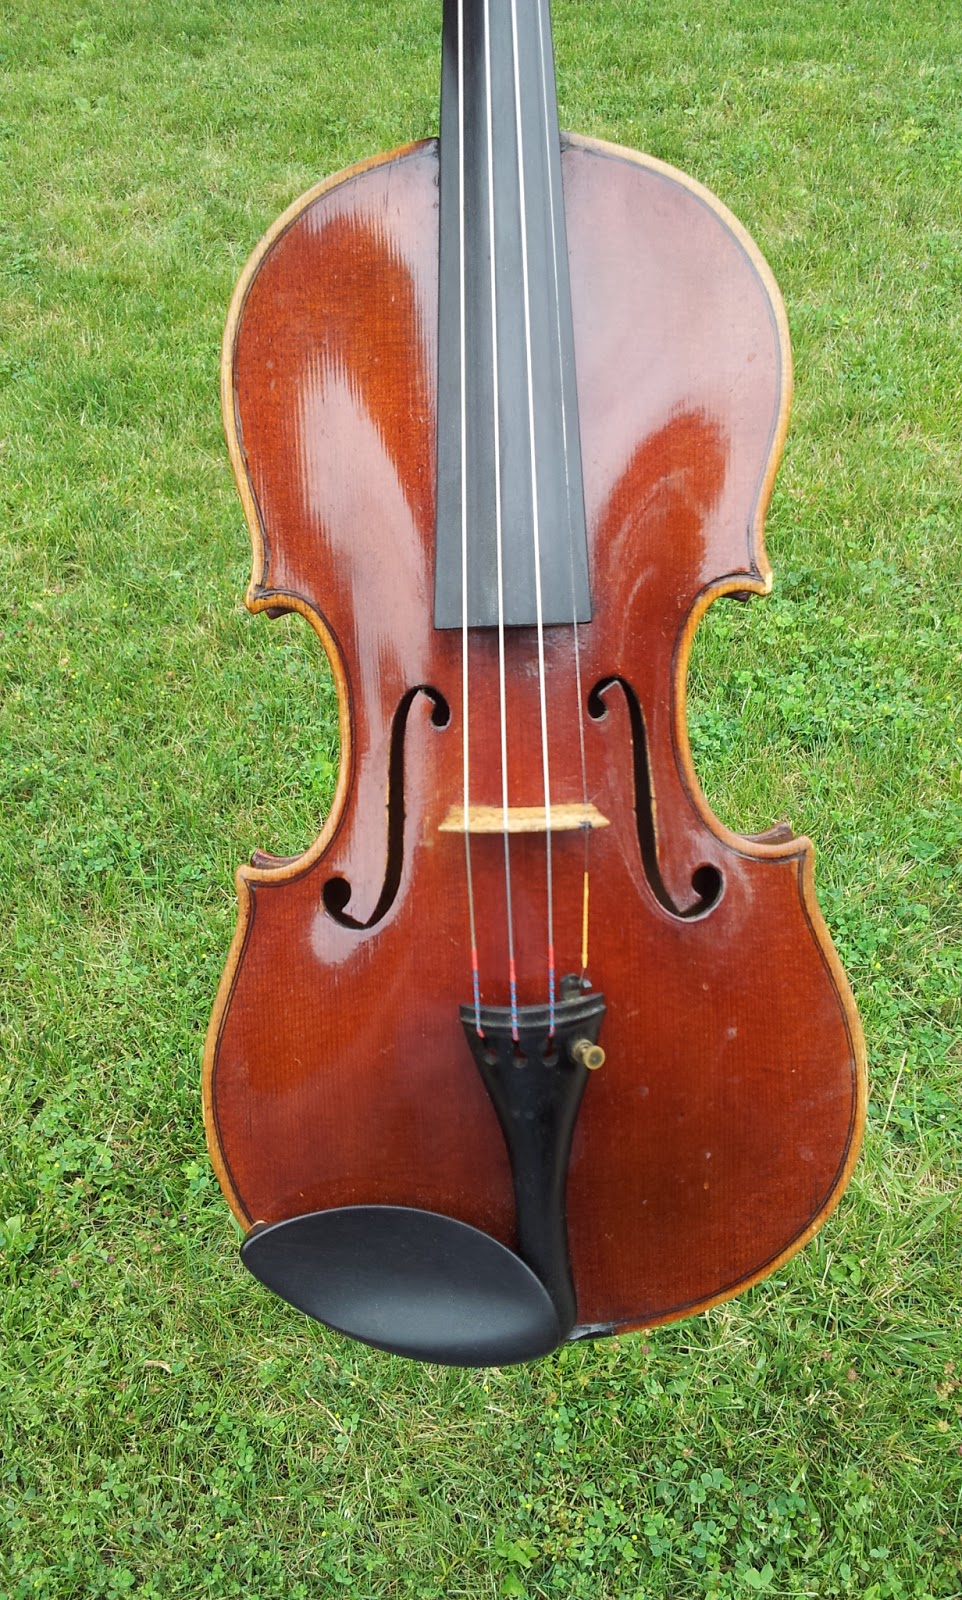 Riedstras Violin Shop Inc | electronics store | 239 Victoria St N, Kitchener, ON N2H 5C9, Canada | 5197433838 OR +1 519-743-3838